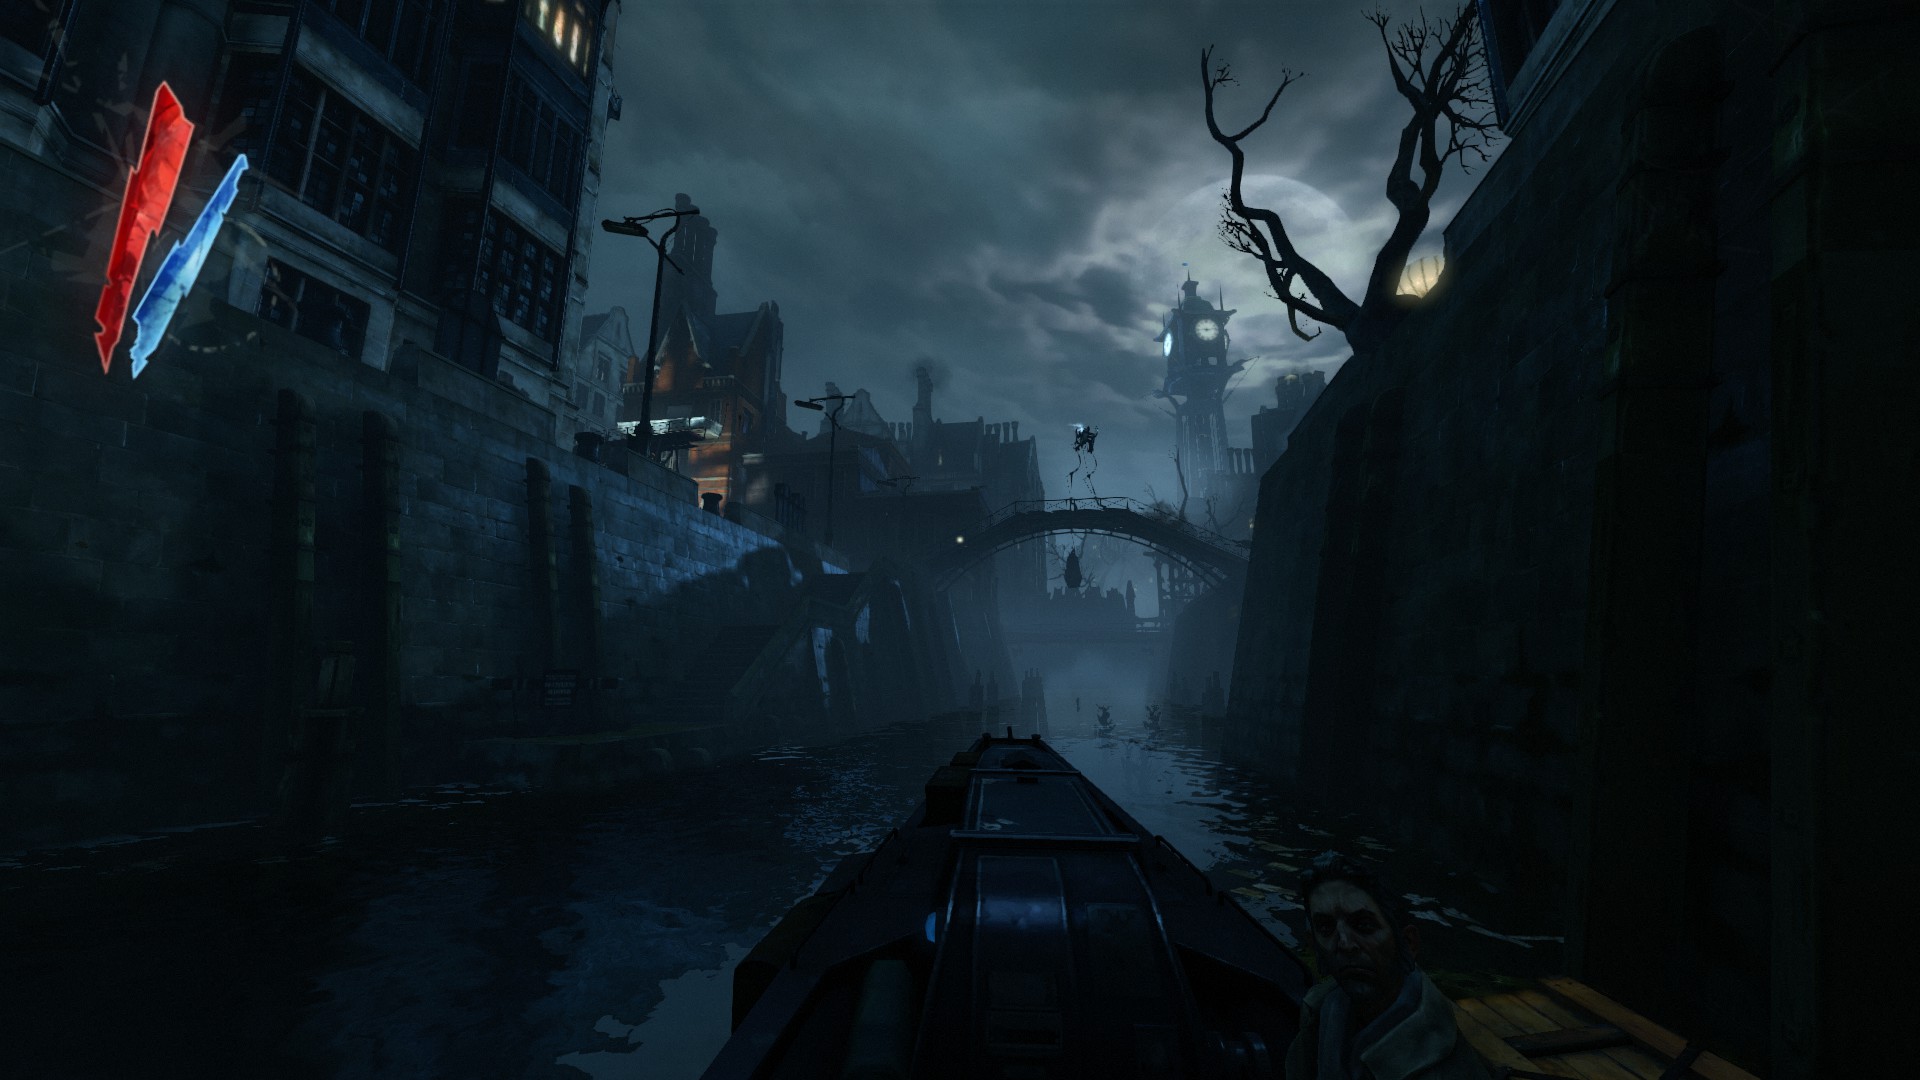 A dark and spooky city with a clock tower in the distance.